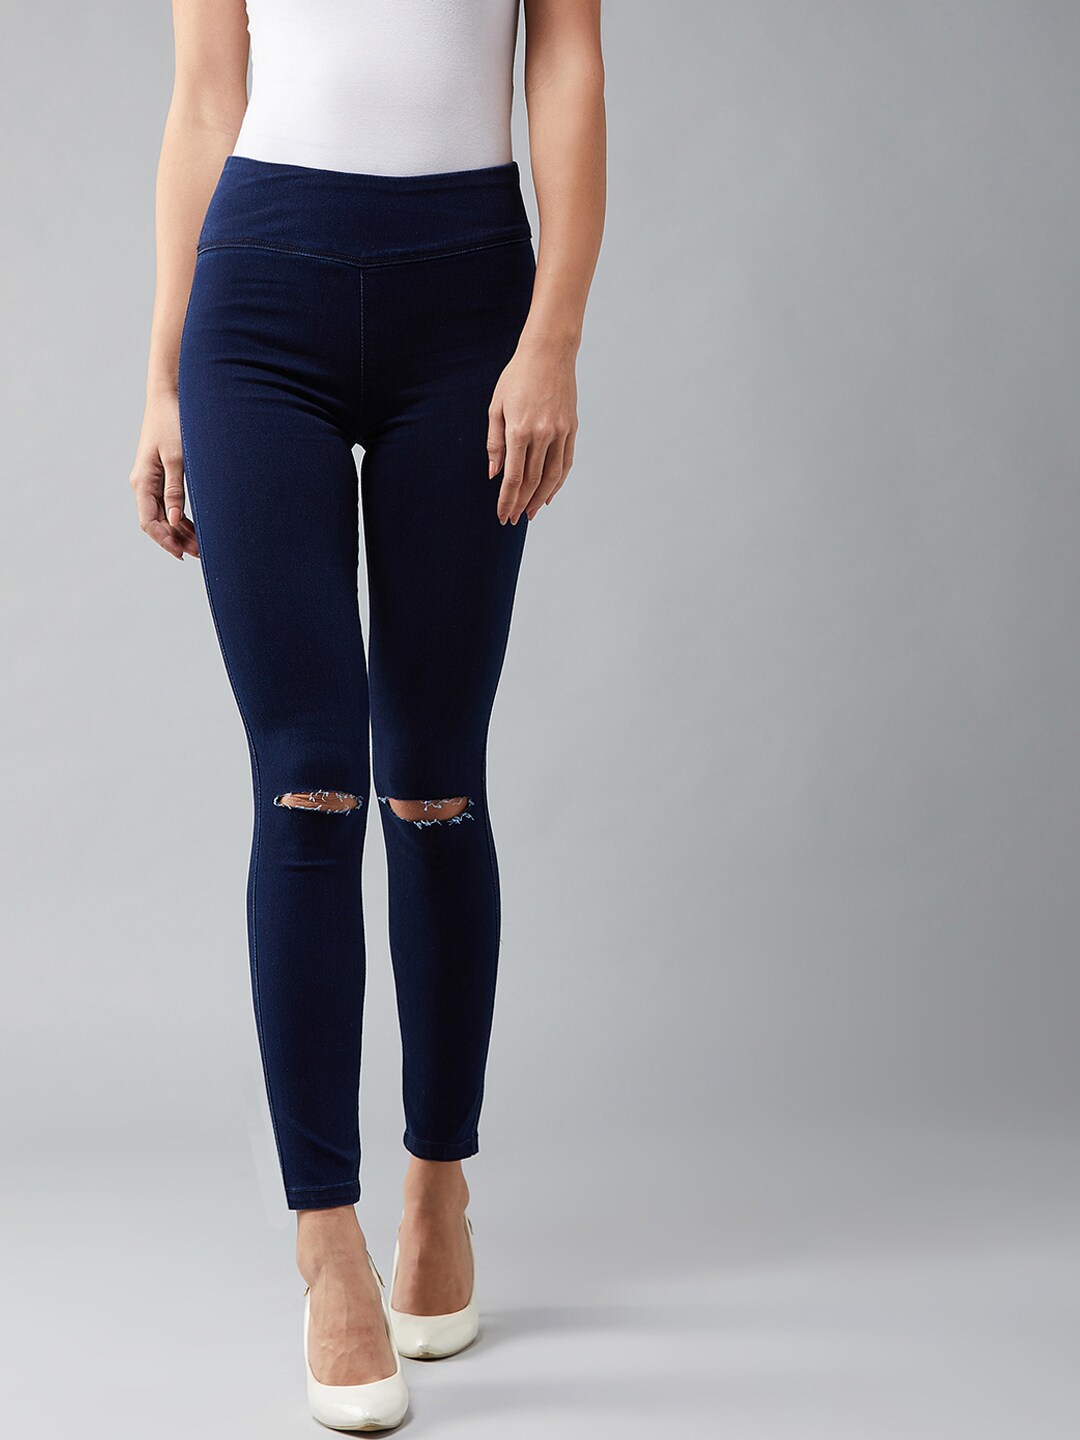 DOLCE CRUDO Women Navy Blue Solid Skinny-Fit Stretchable Jeggings